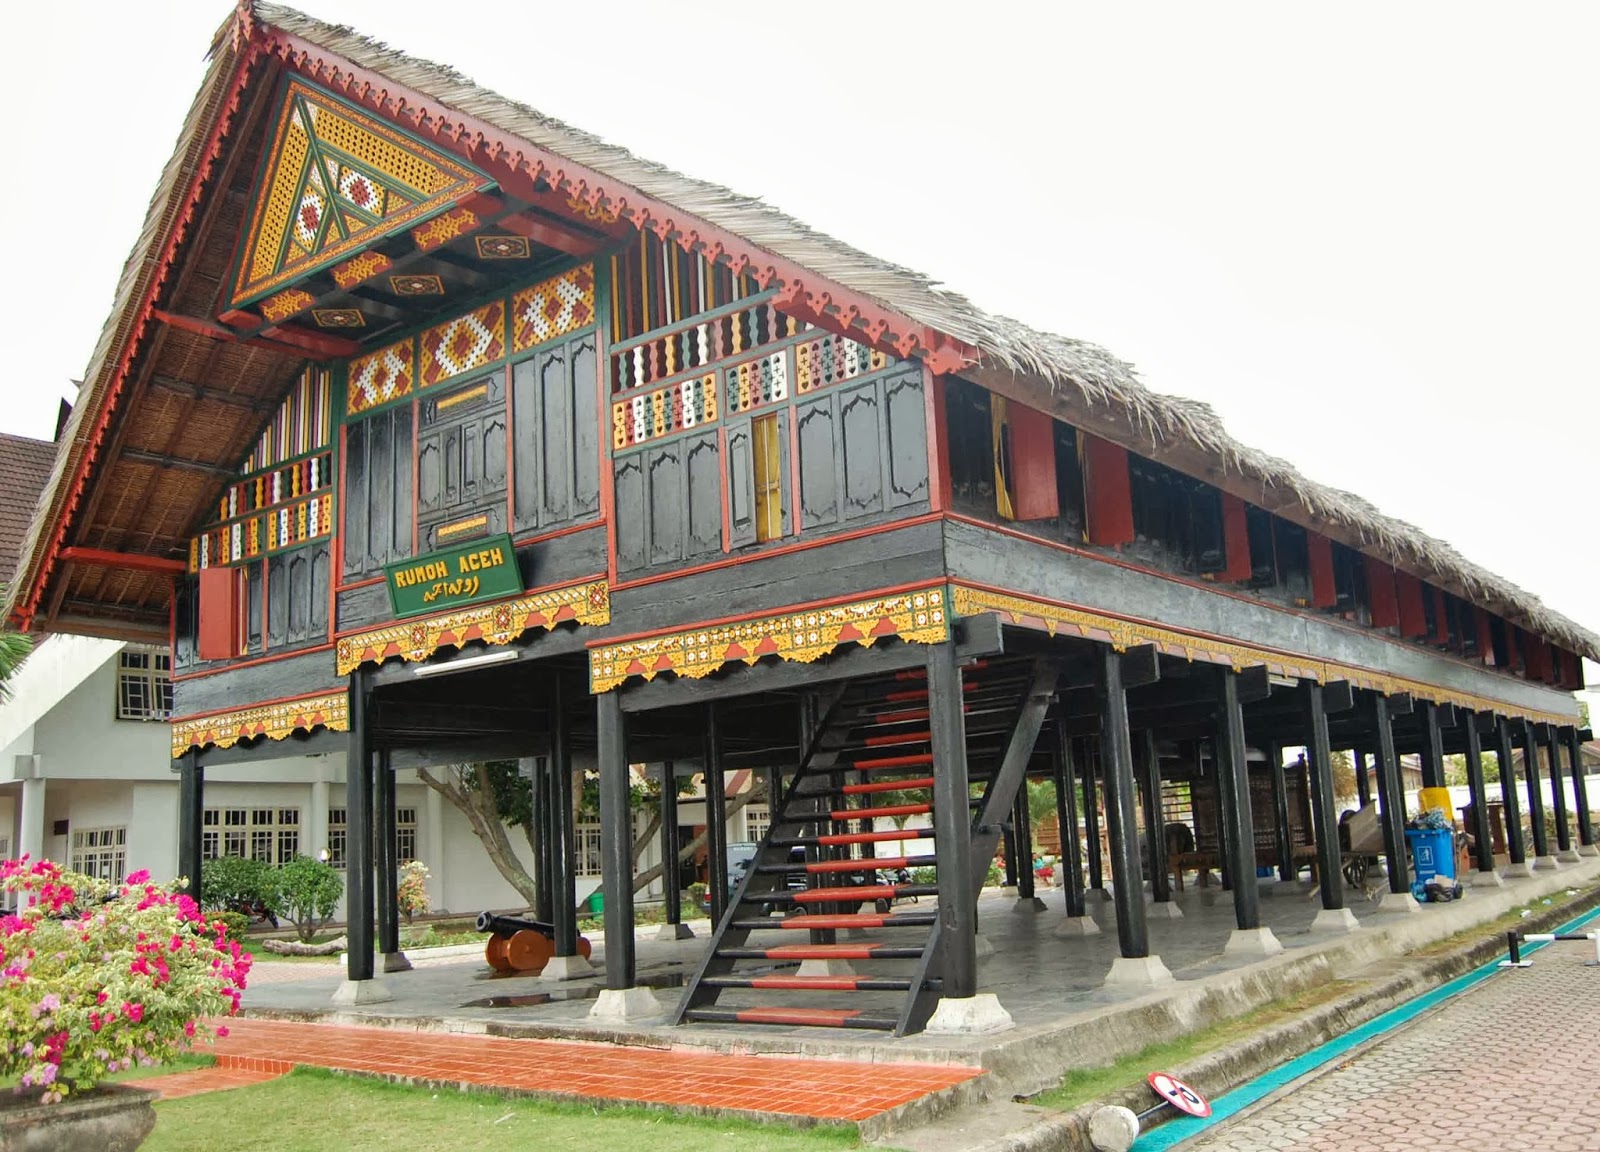 Download this Rumah Adat Tradisional Aceh picture